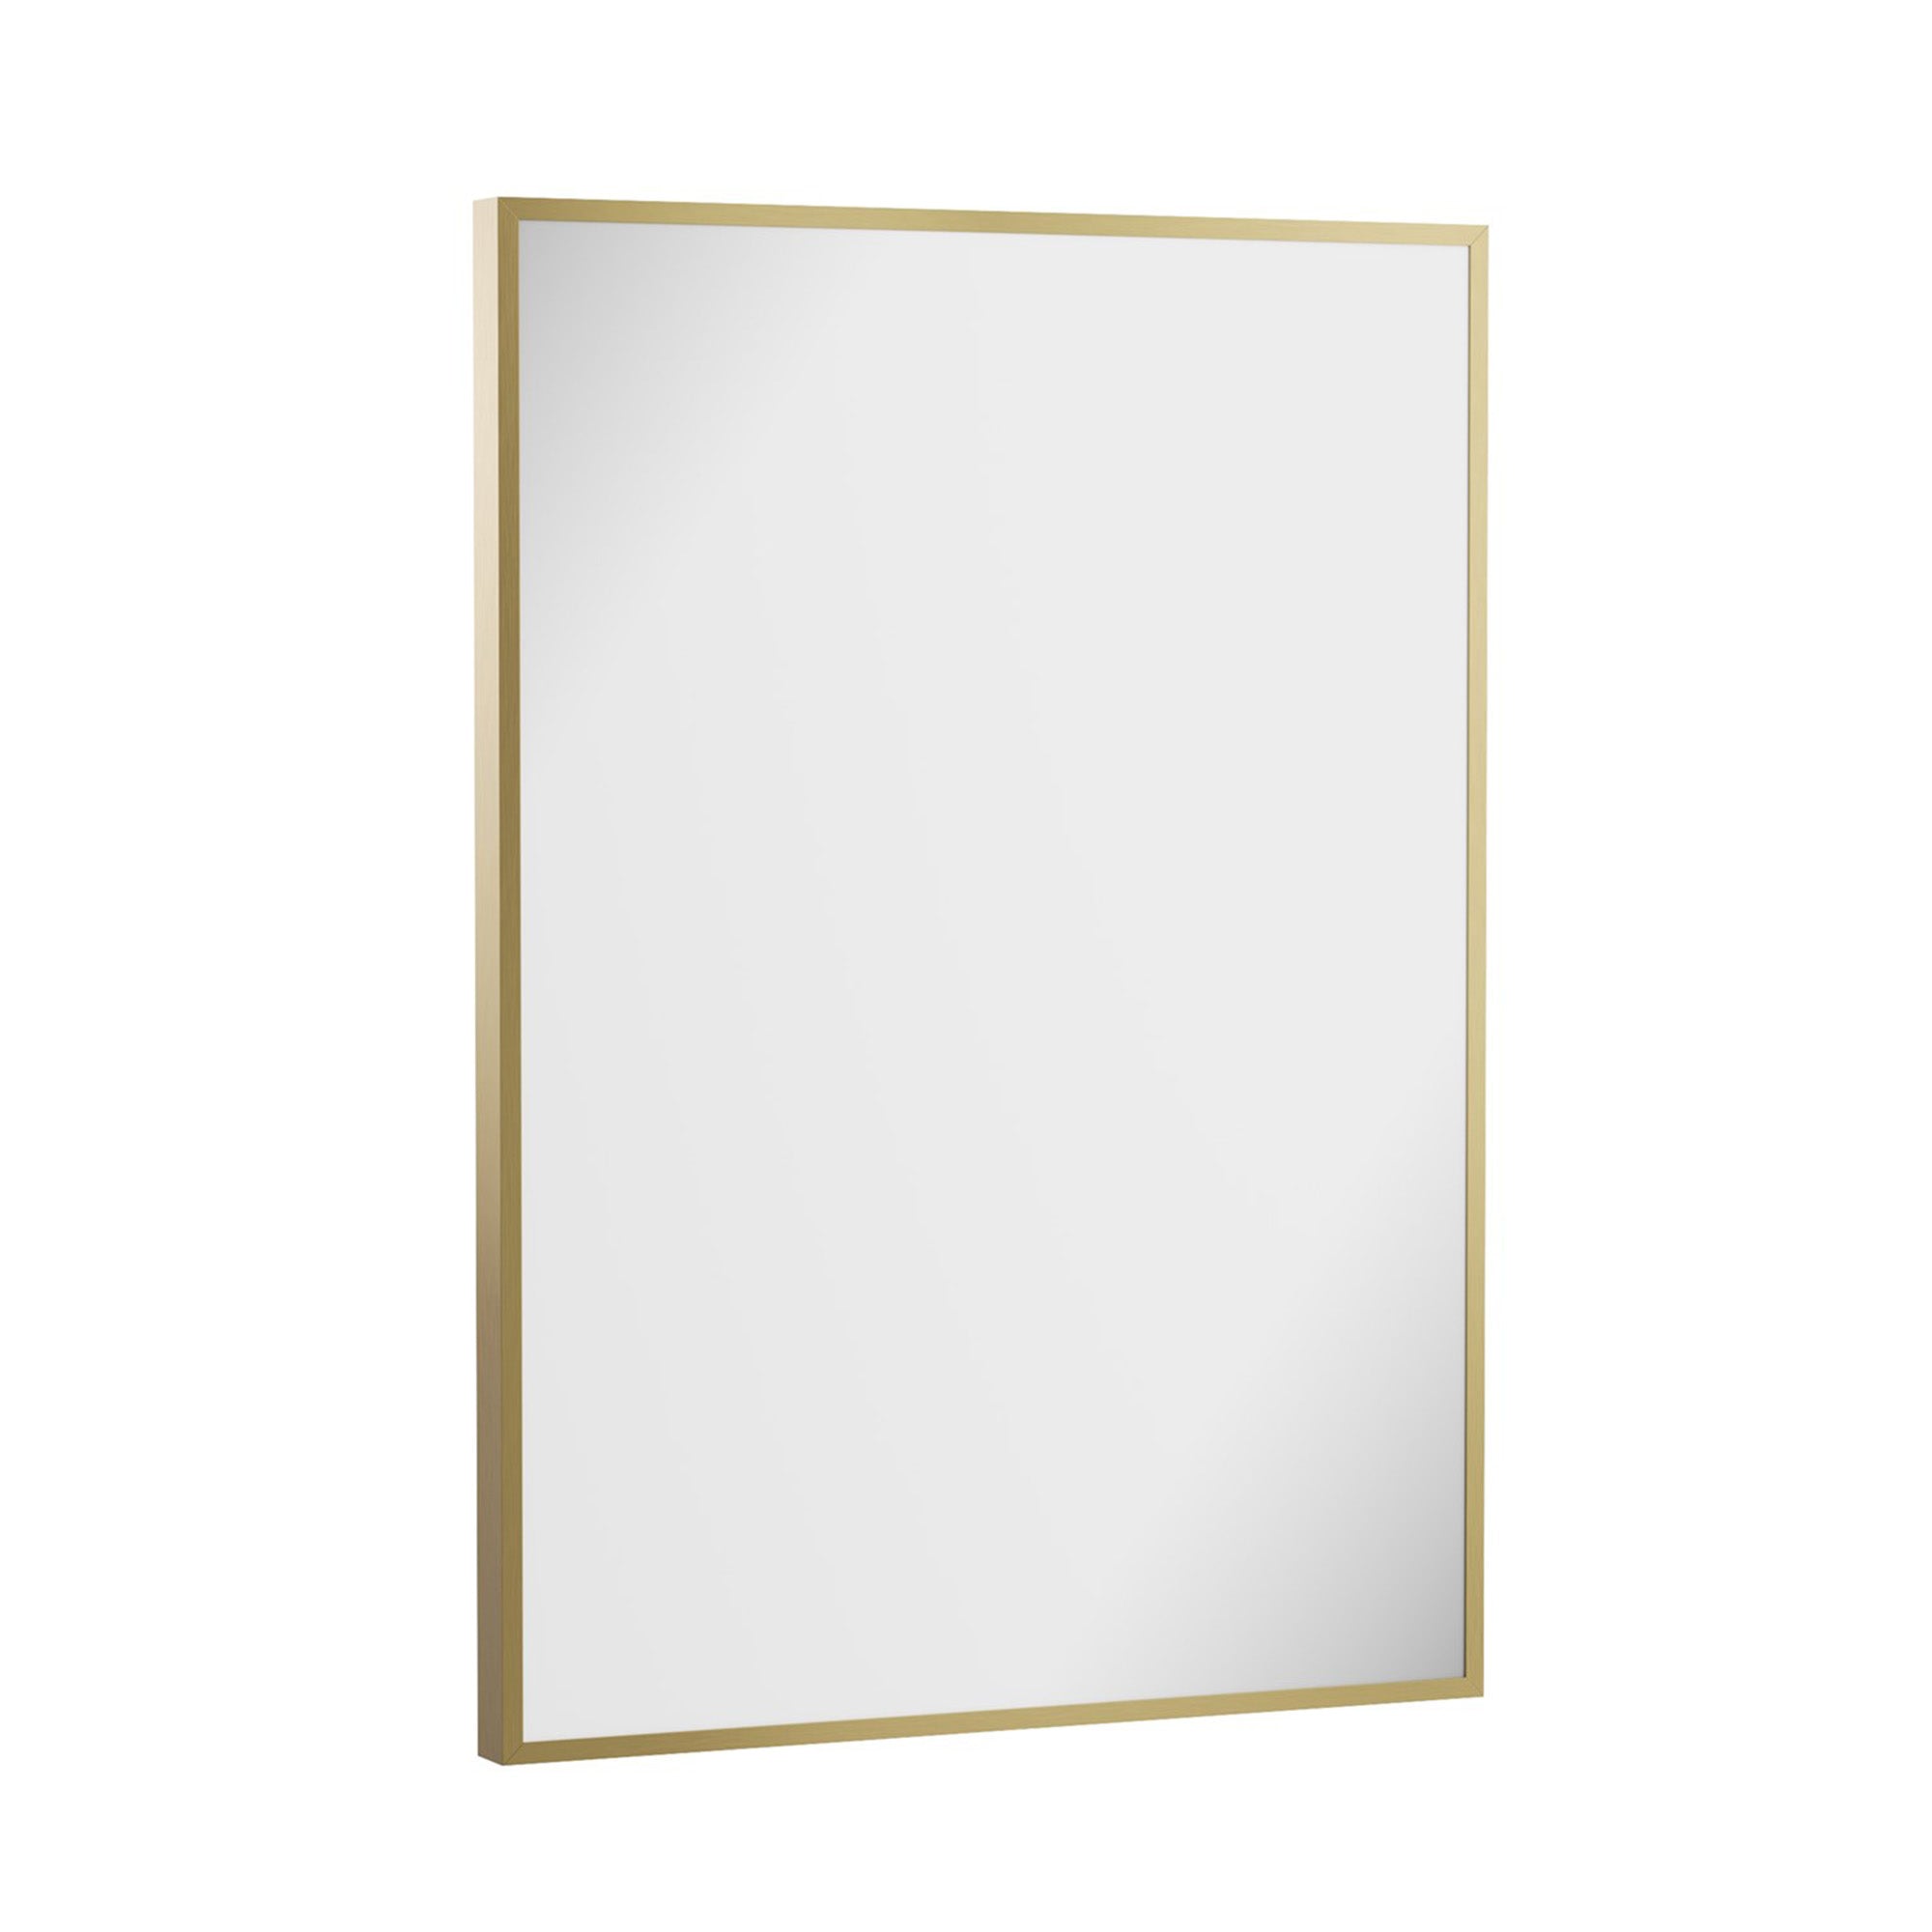 crosswater mpro non led mirror 500x700mm brushed brass